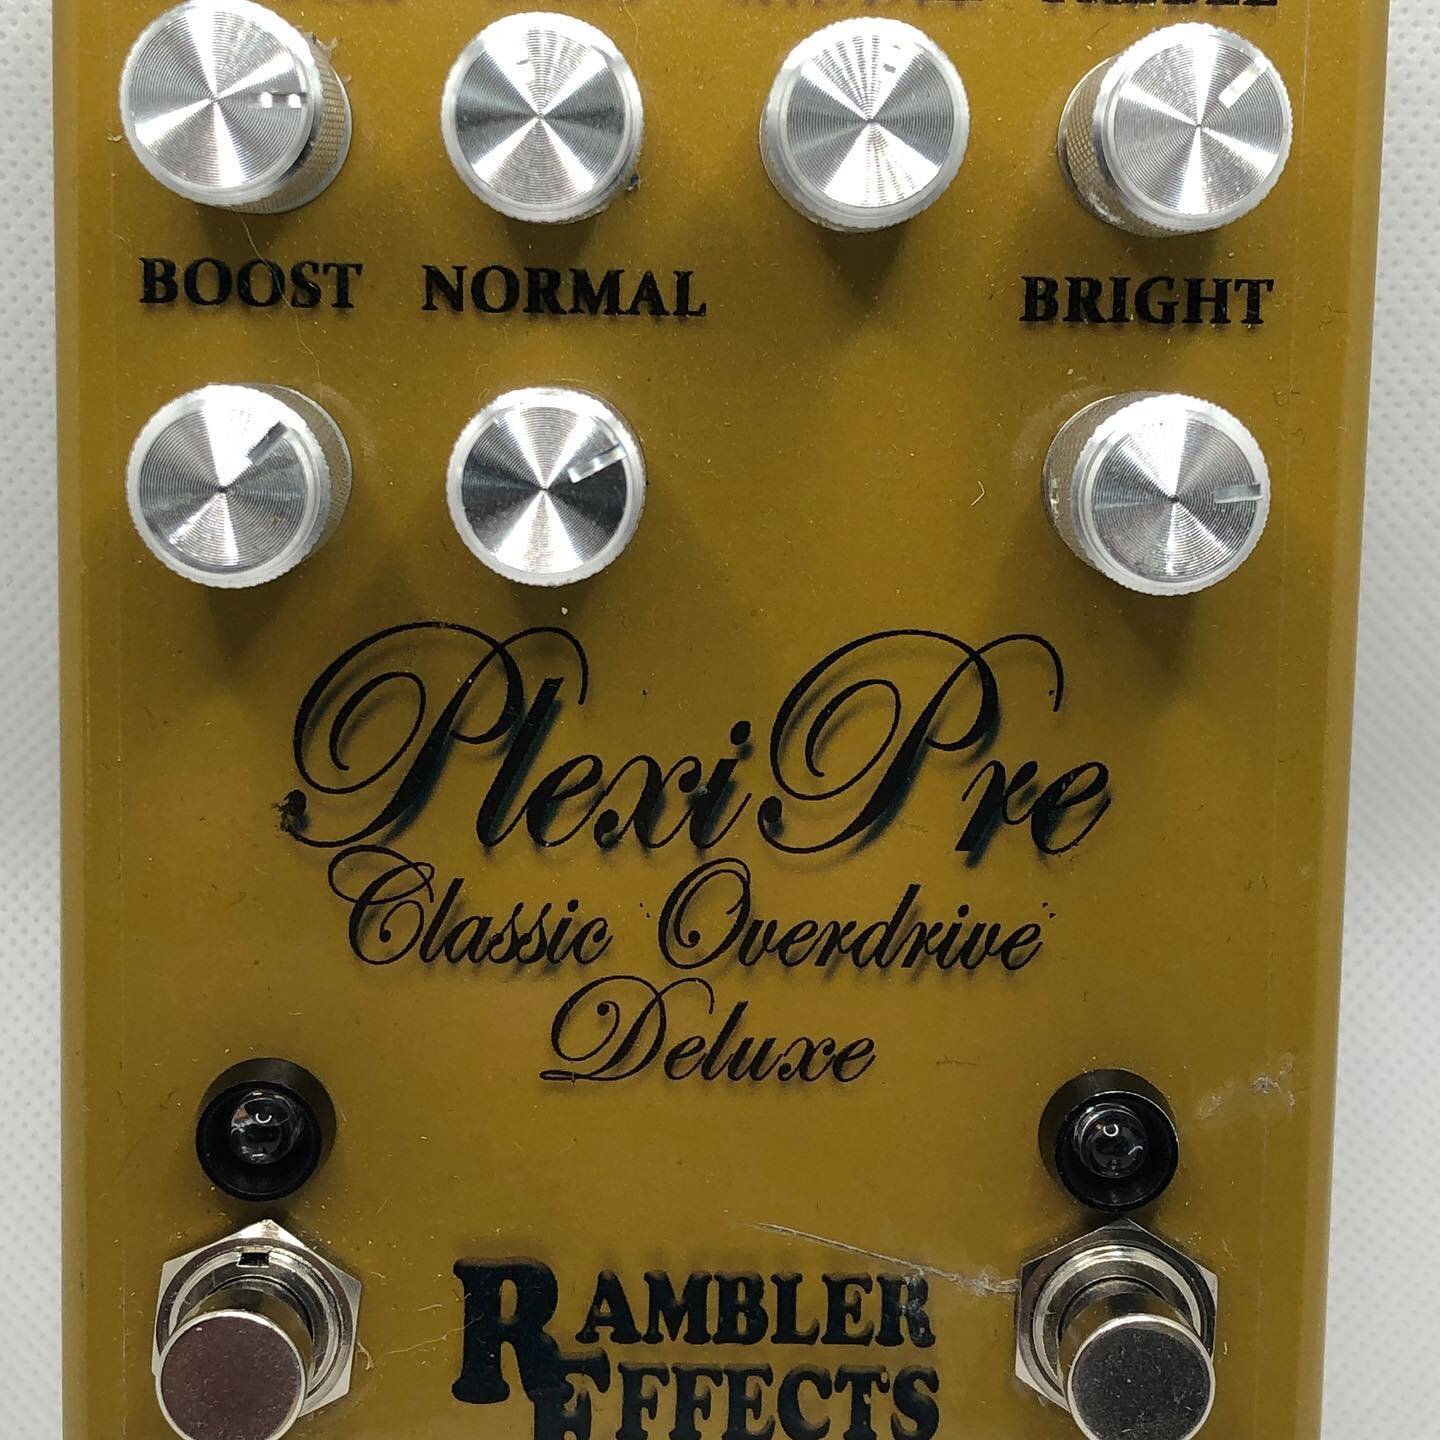 One of my favorites, the Rambler Effects PlexiPre Dlx is an all-JFET preamp/overdrive with a JFET boost that acts more like a second channel, with more gain and snarl! A three band active EQ let&rsquo;s you shape your tone just how you want it.